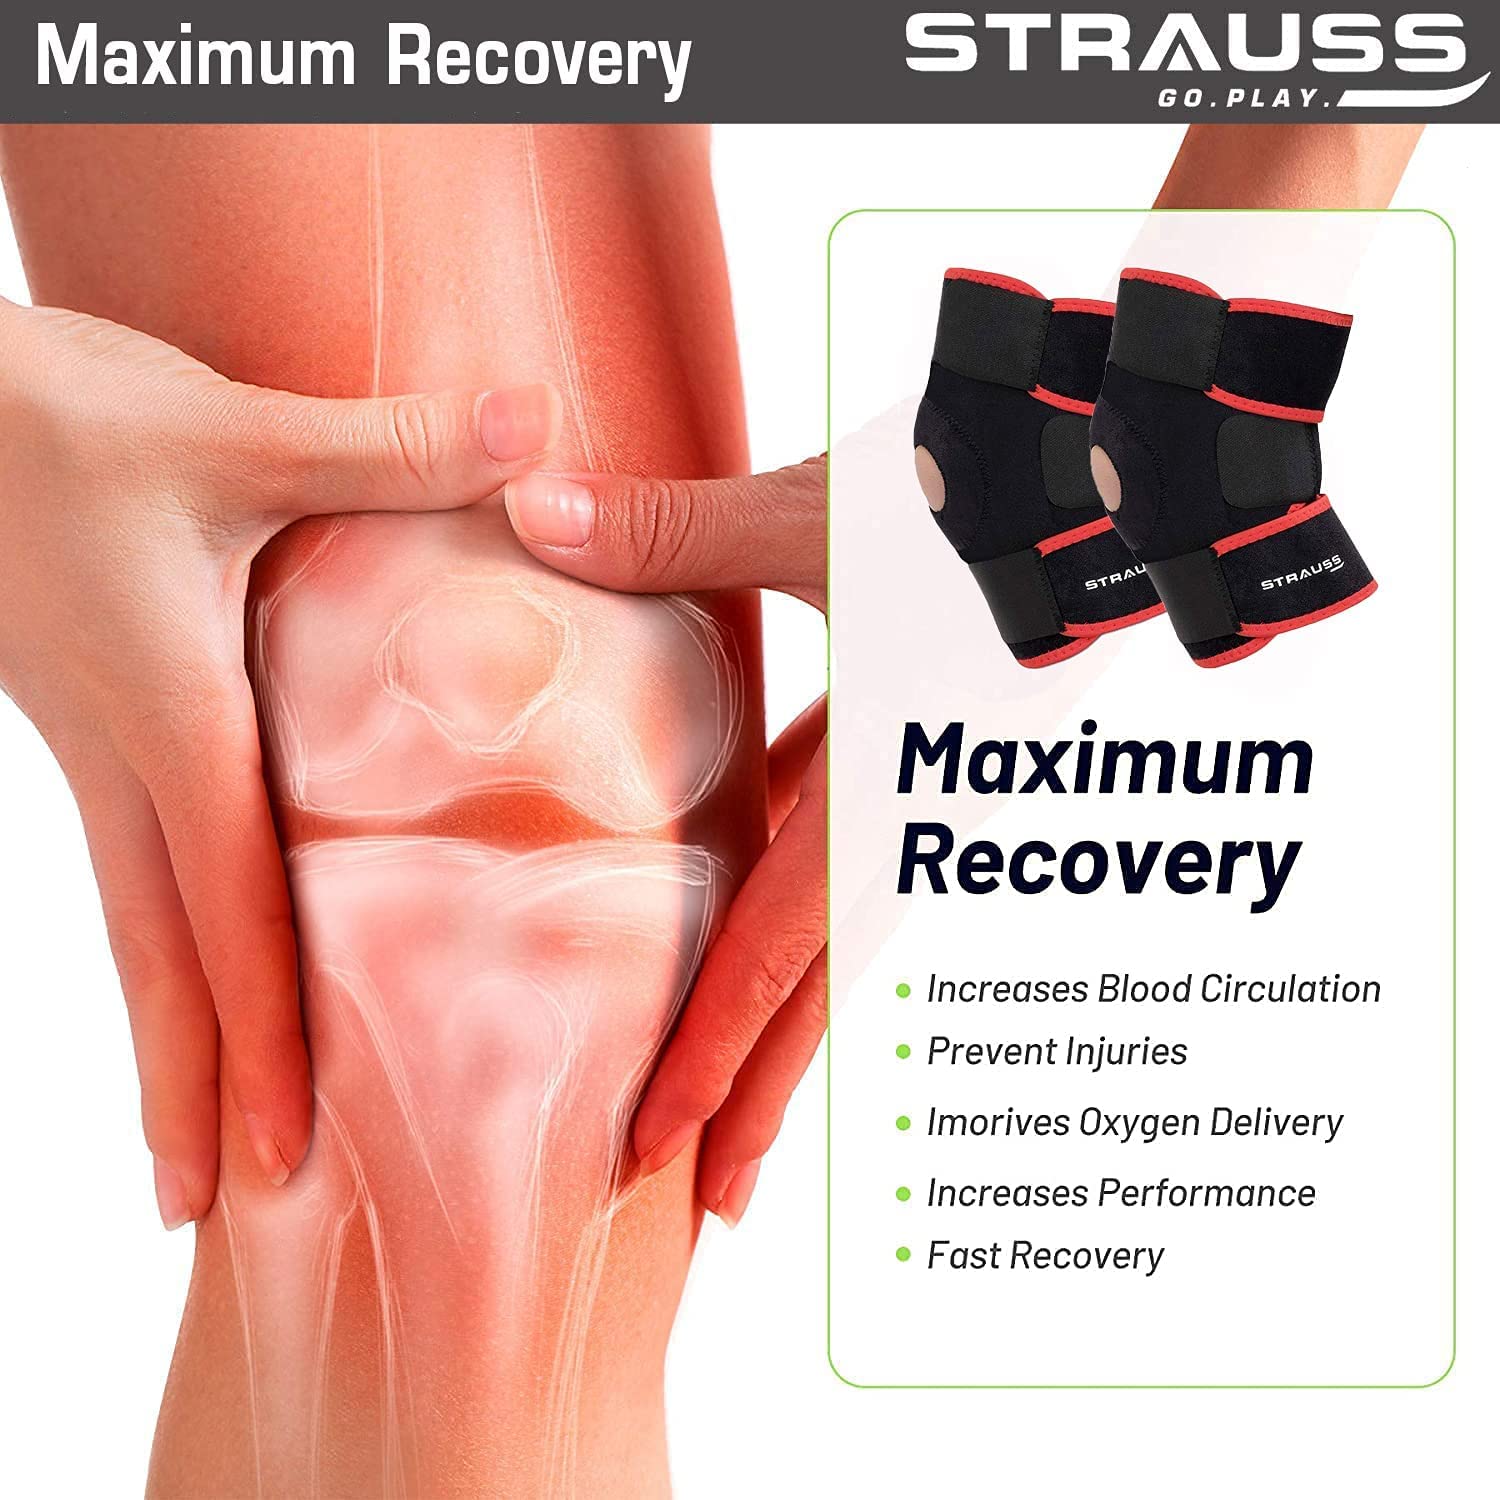 Strauss Adjustable Knee Support Patella|Knee Support for Men and Women|Knee Brace|Knee Guard |Knee Cap|Knee pain relief|Knee belt|Joint pain relief|Pair, (Free Size, Black/Red)